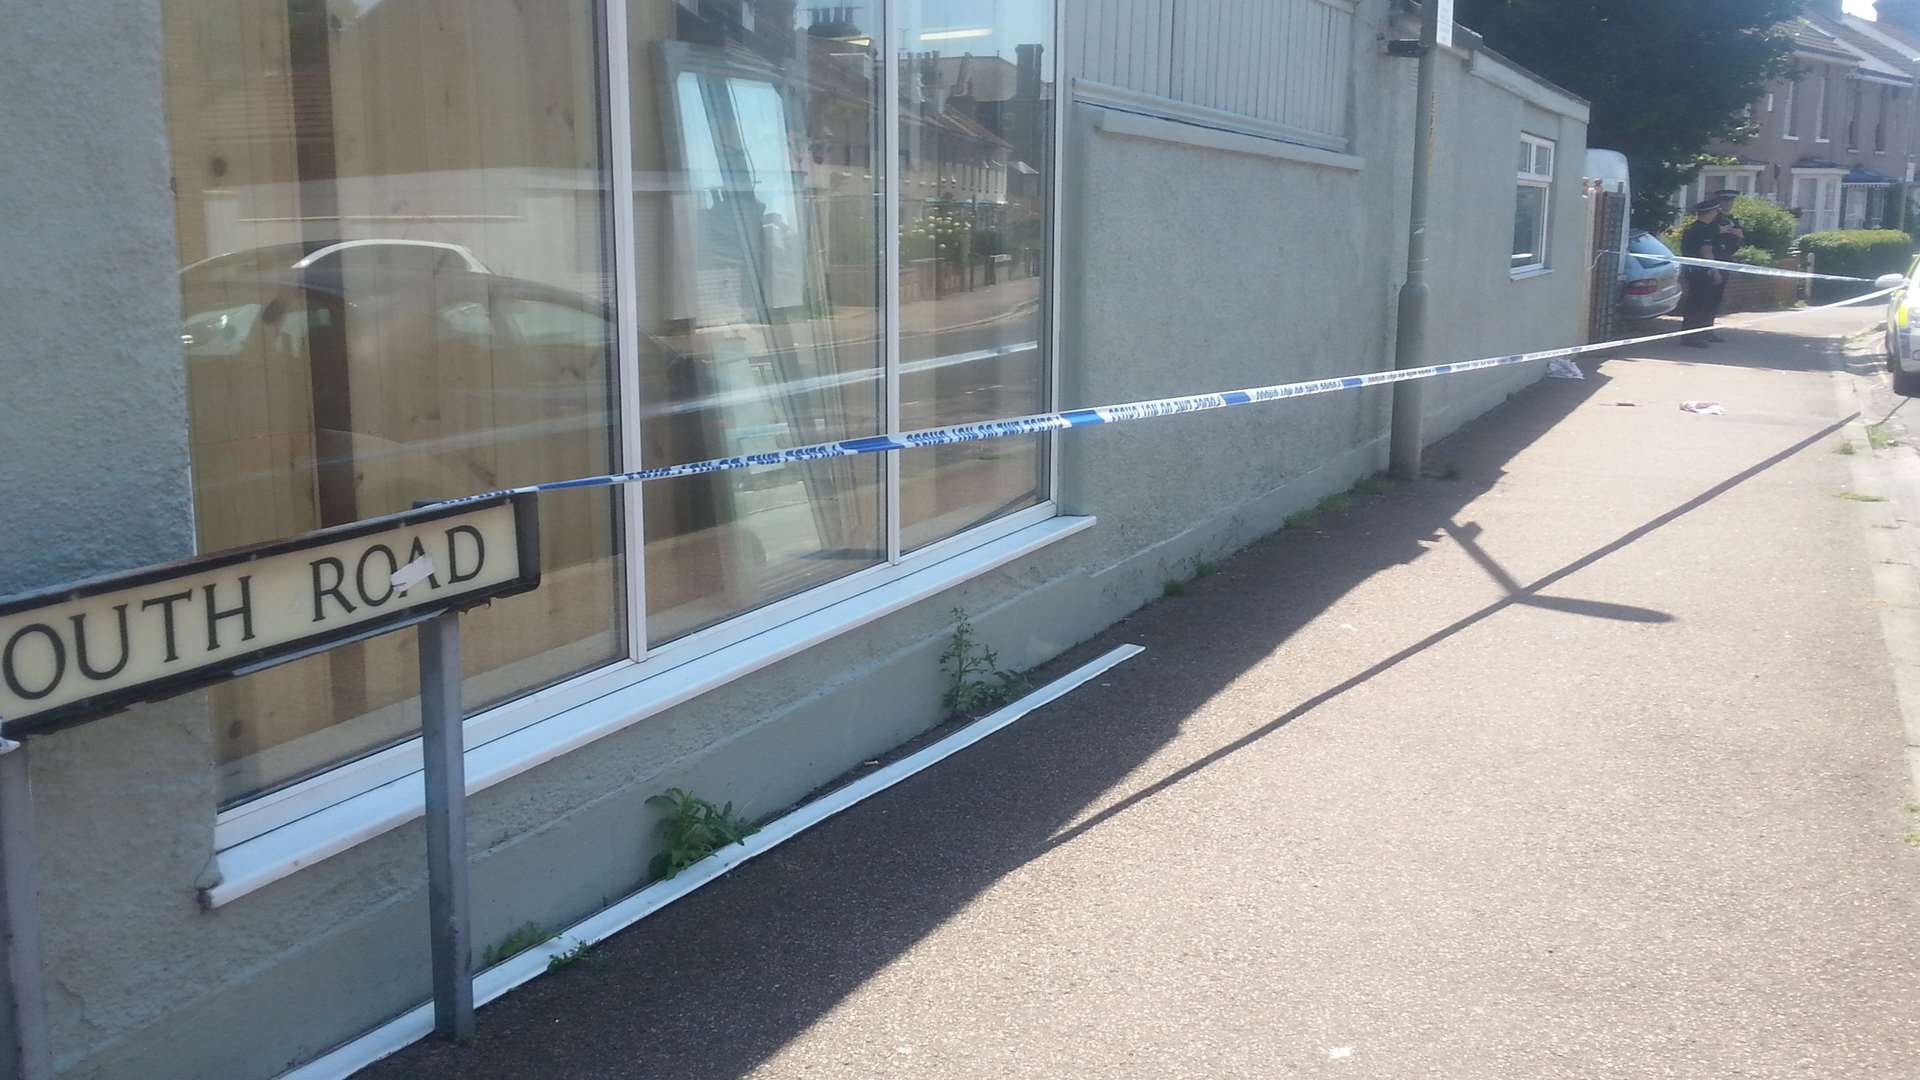 A section of South Road has been taped off after stabbing